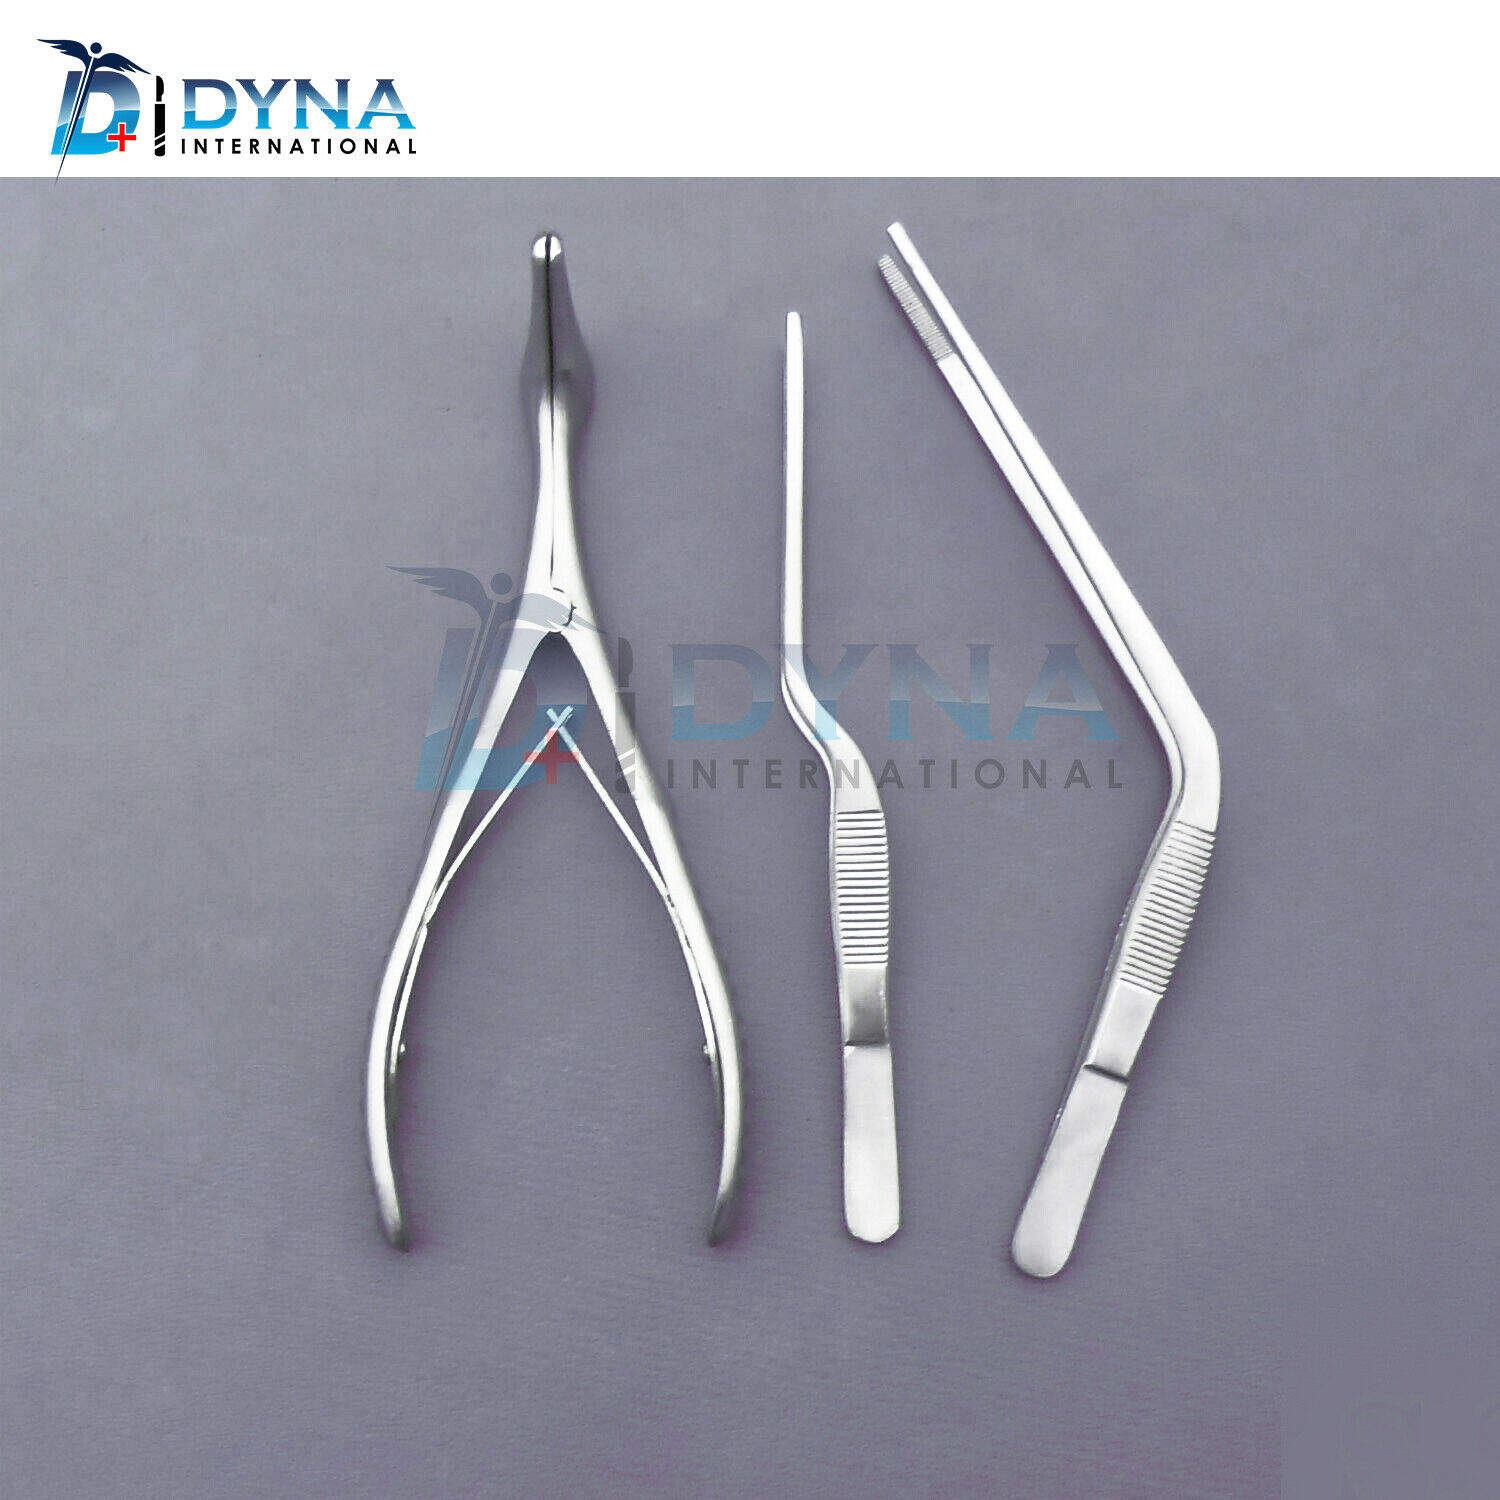 epistaxis-set-adult-nasal-forceps-instruments-stainless-steel-1.jpg